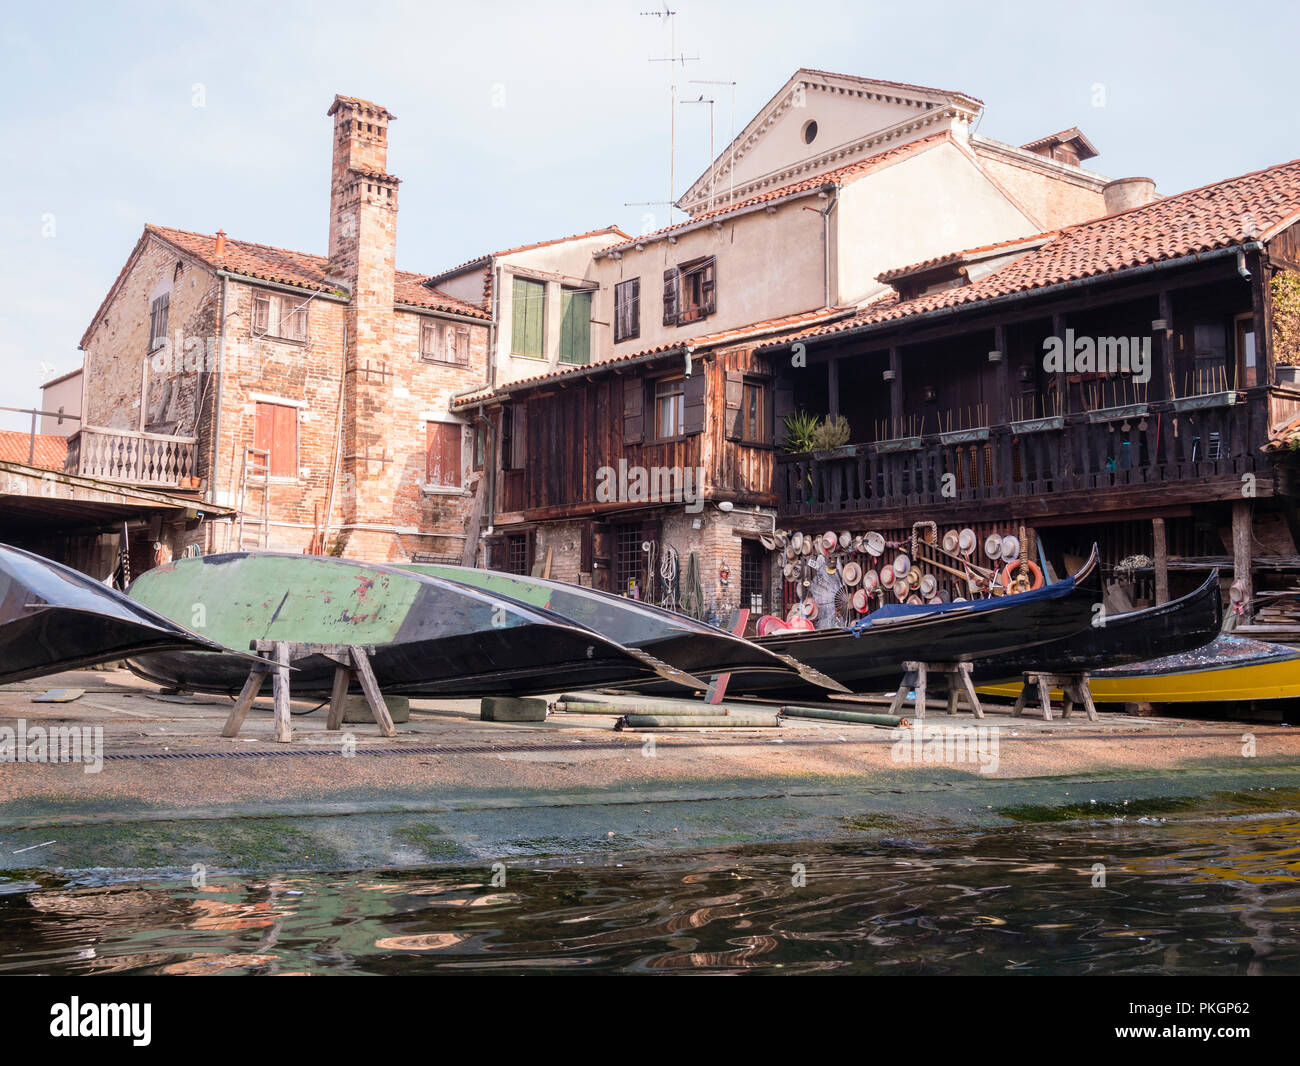 A boat yard in Venice where gondolas are built and repaired Stock Photo